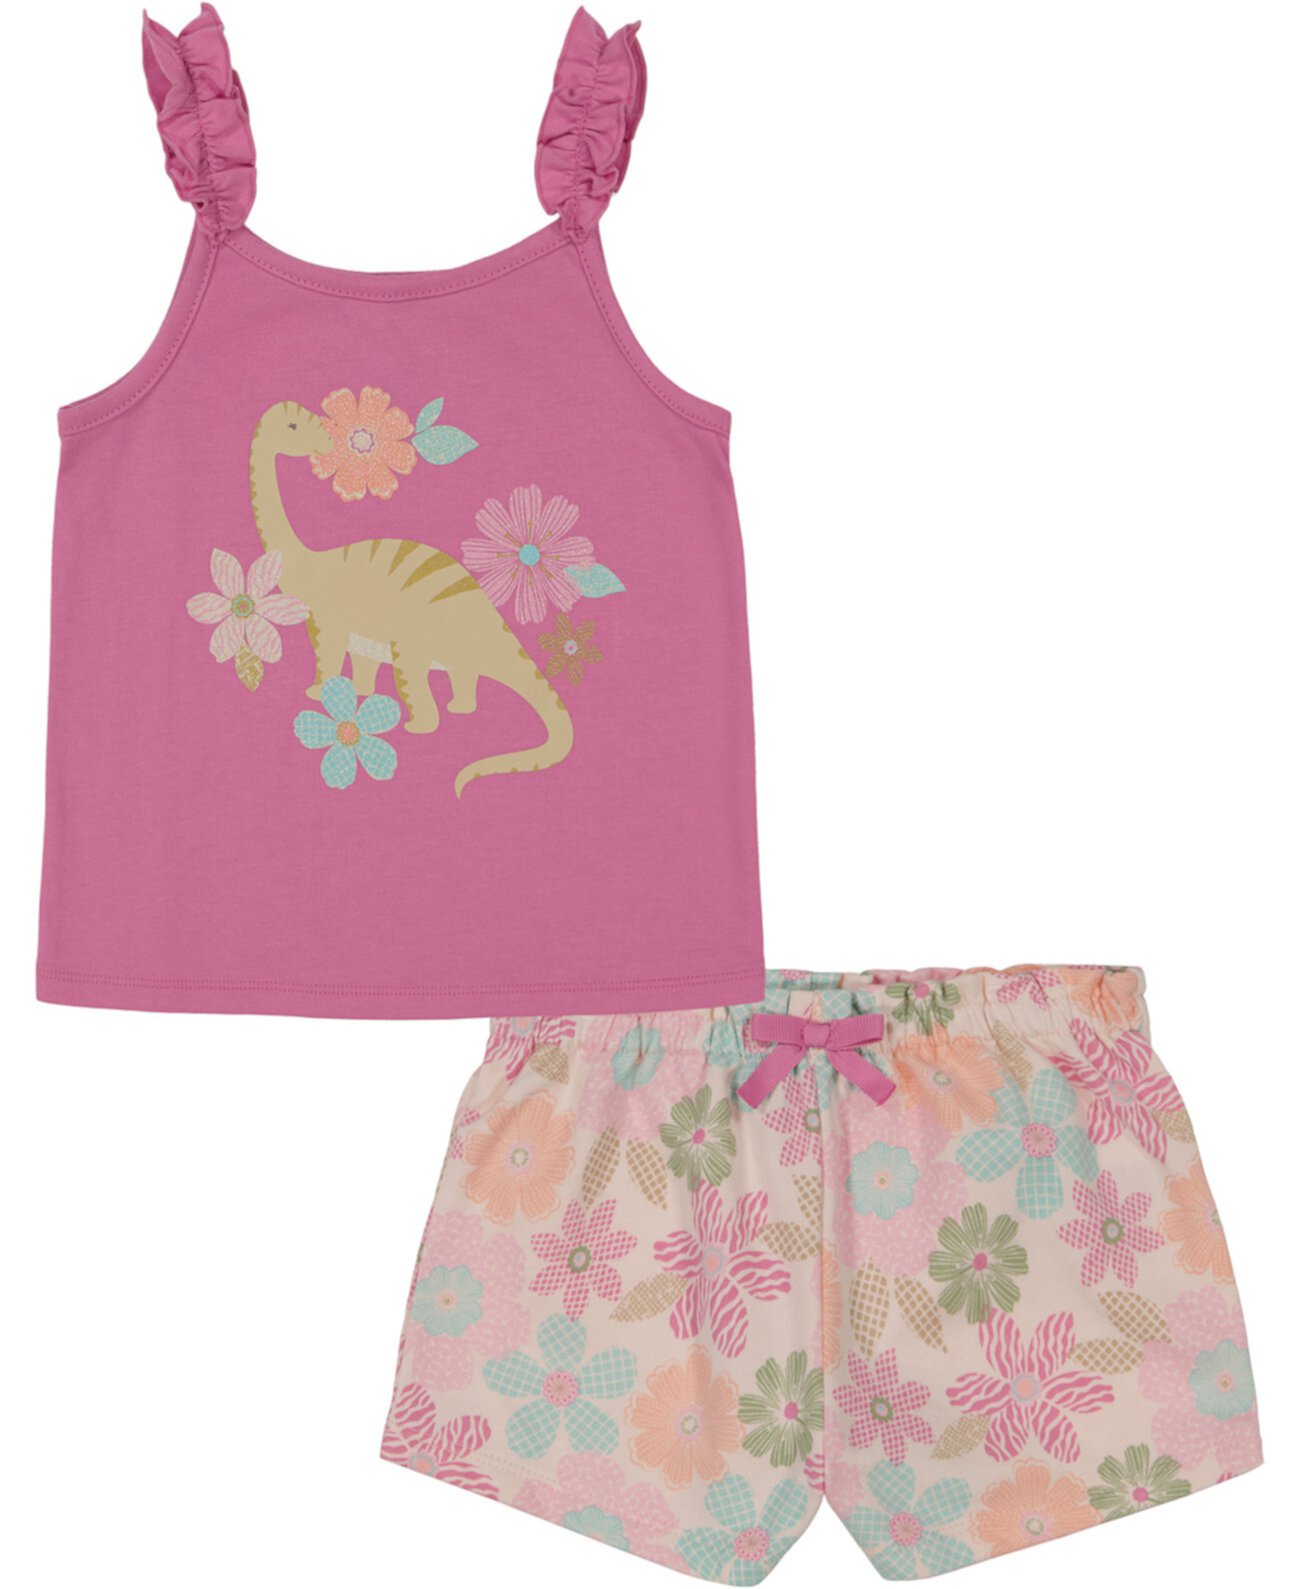 Little Girls Dinosaur Tank Top & Floral French Terry Shorts, 2 piece set Kids Headquarters